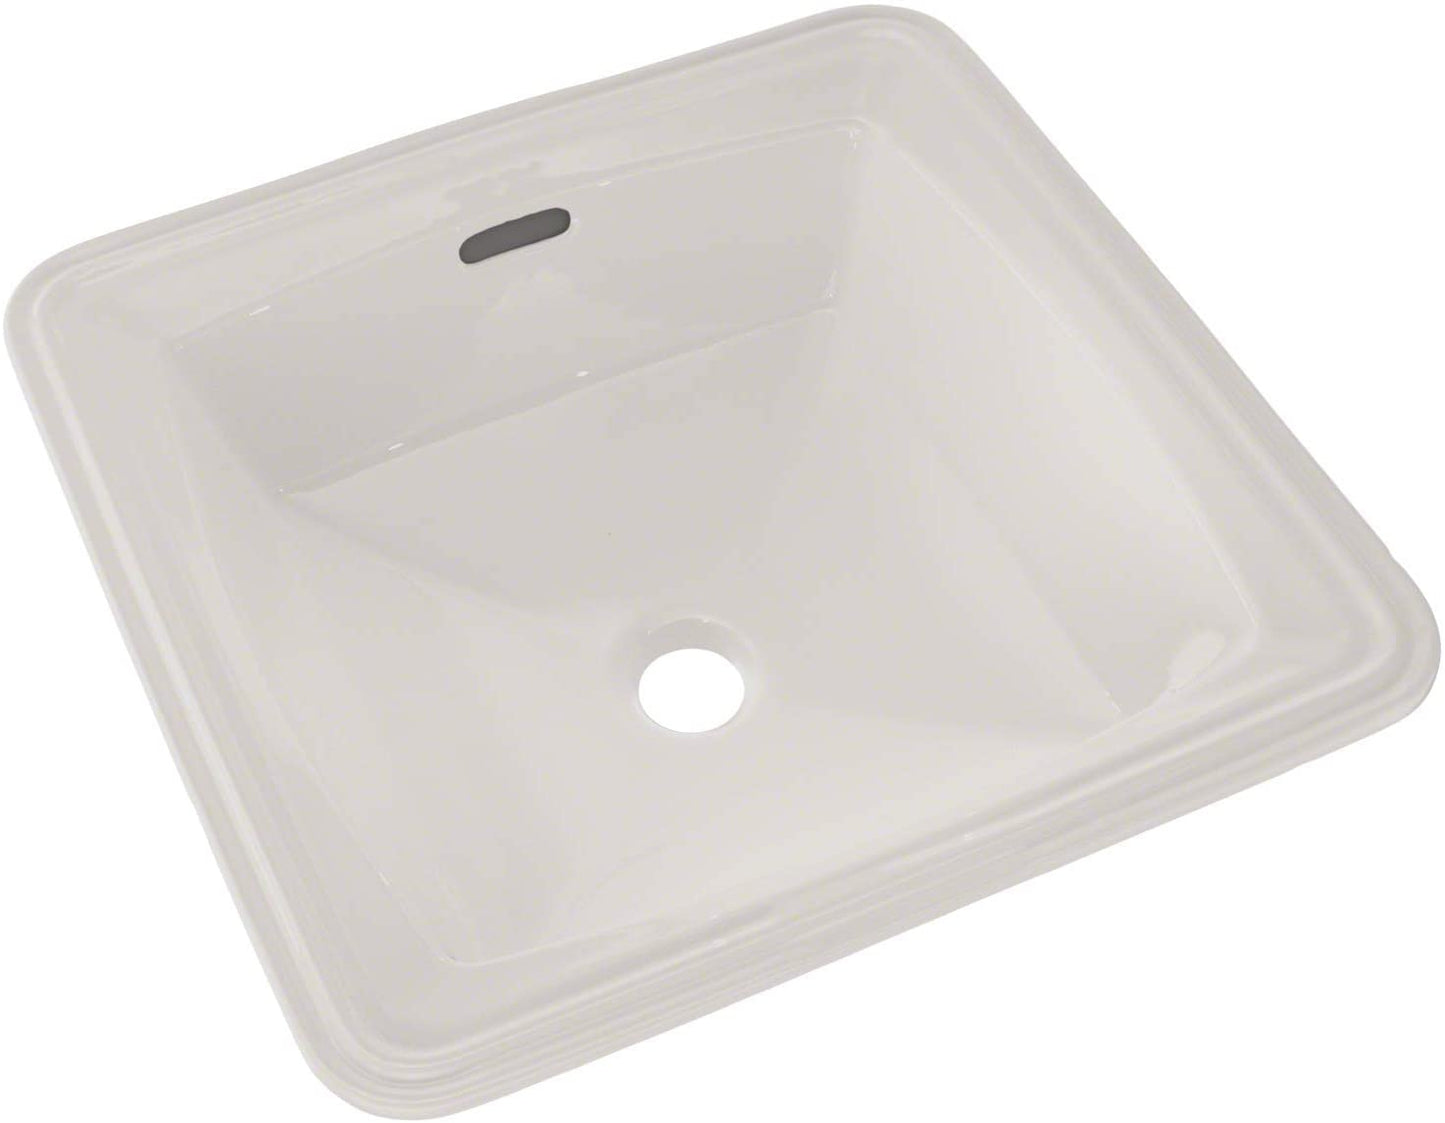 Toto LT491G#01 - Connelly Vitreous China Undermount Square Bathroom Sink, 17'' L x 17'' W x 7.5'' H-